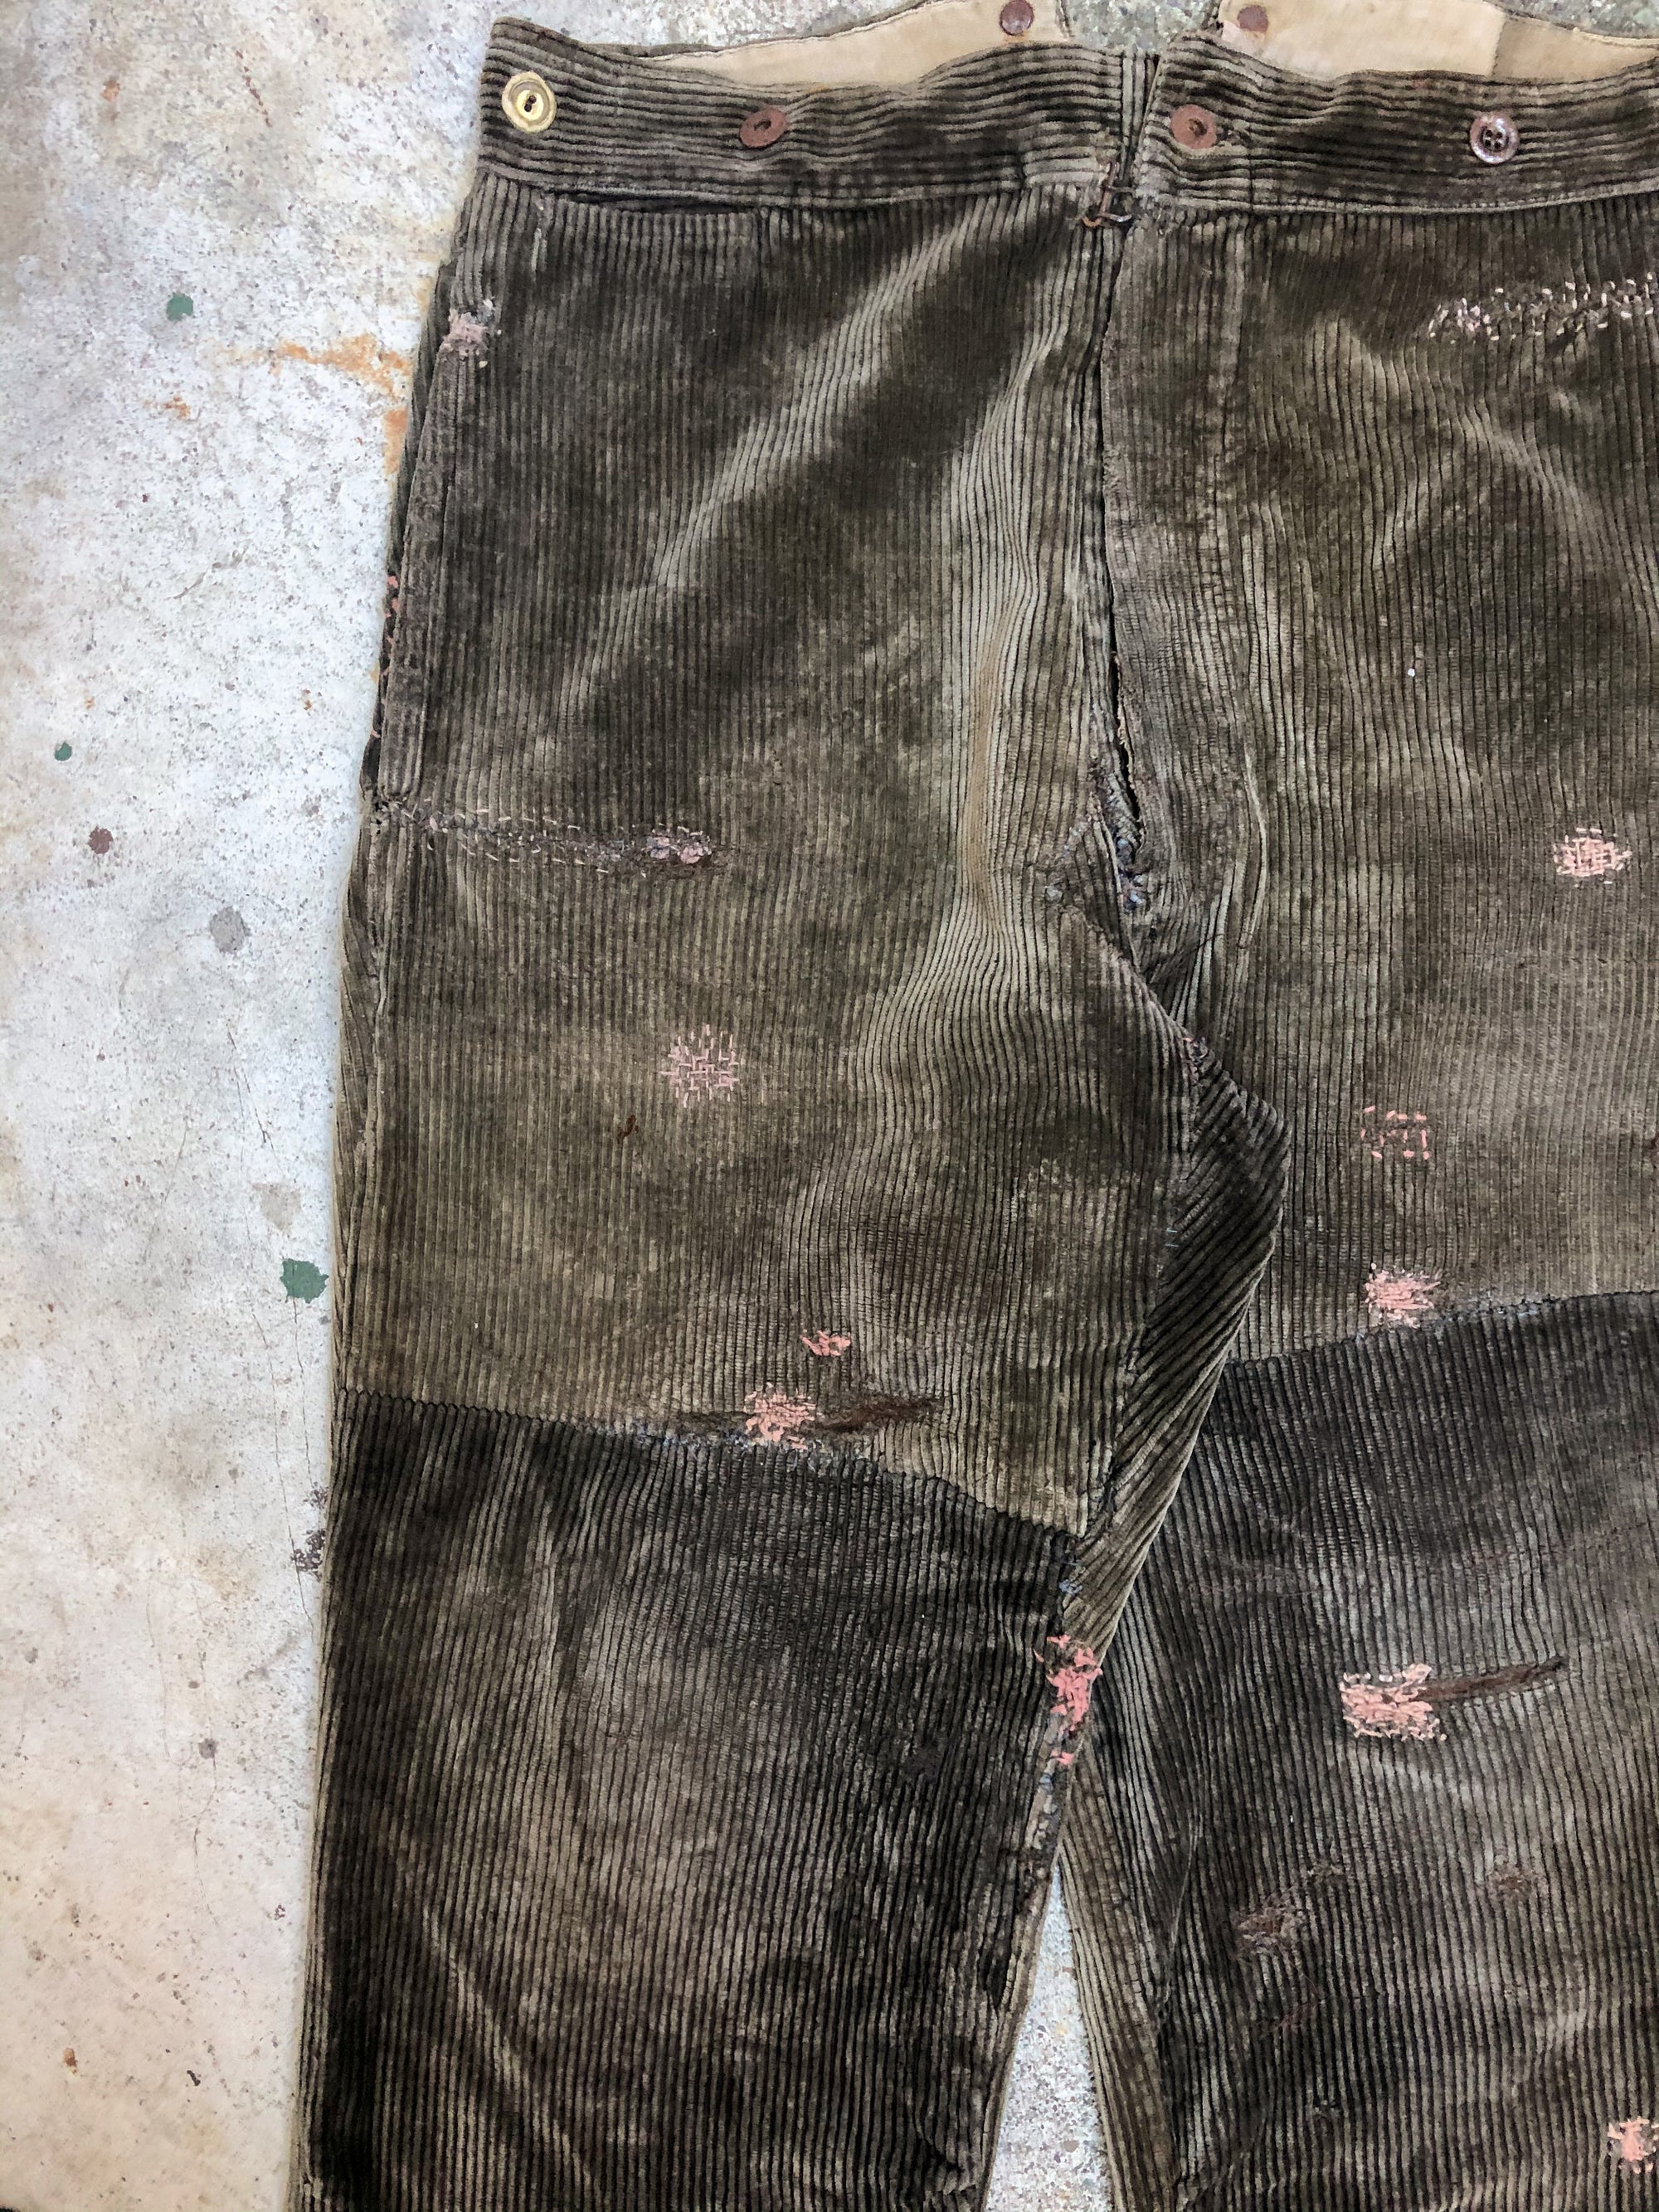 1930s Repaired French Corduroy Work Pants (34X25)